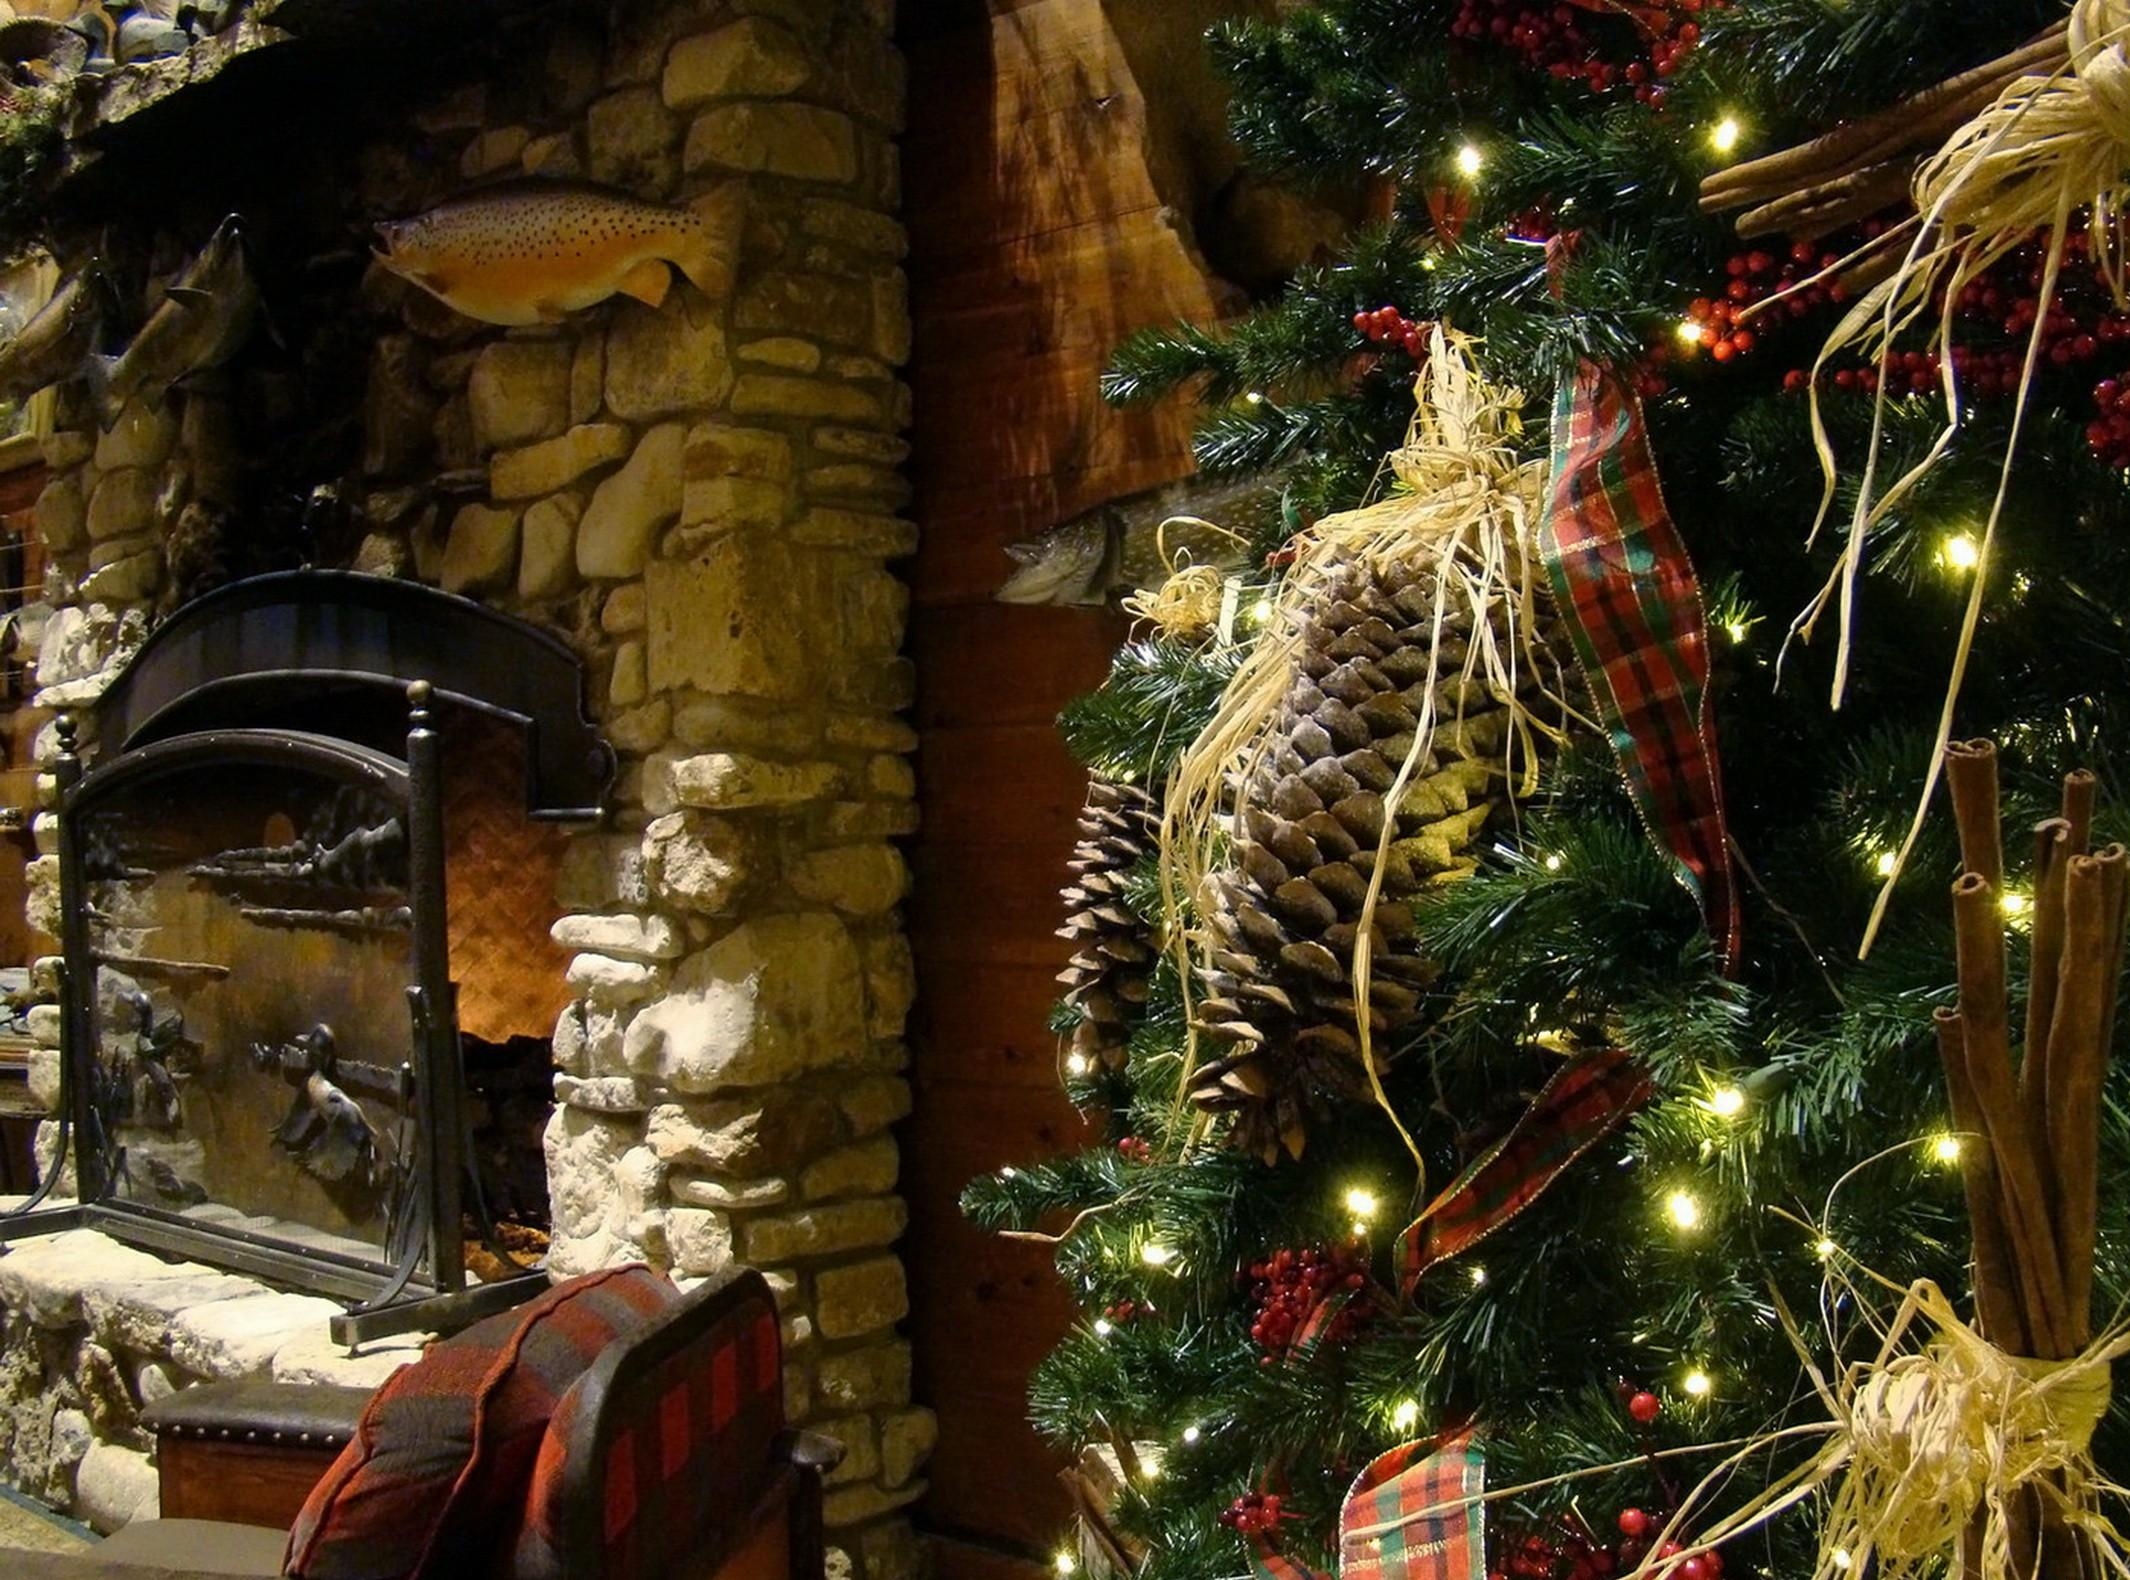 Widescreen image garland, holidays, fireplace, toys